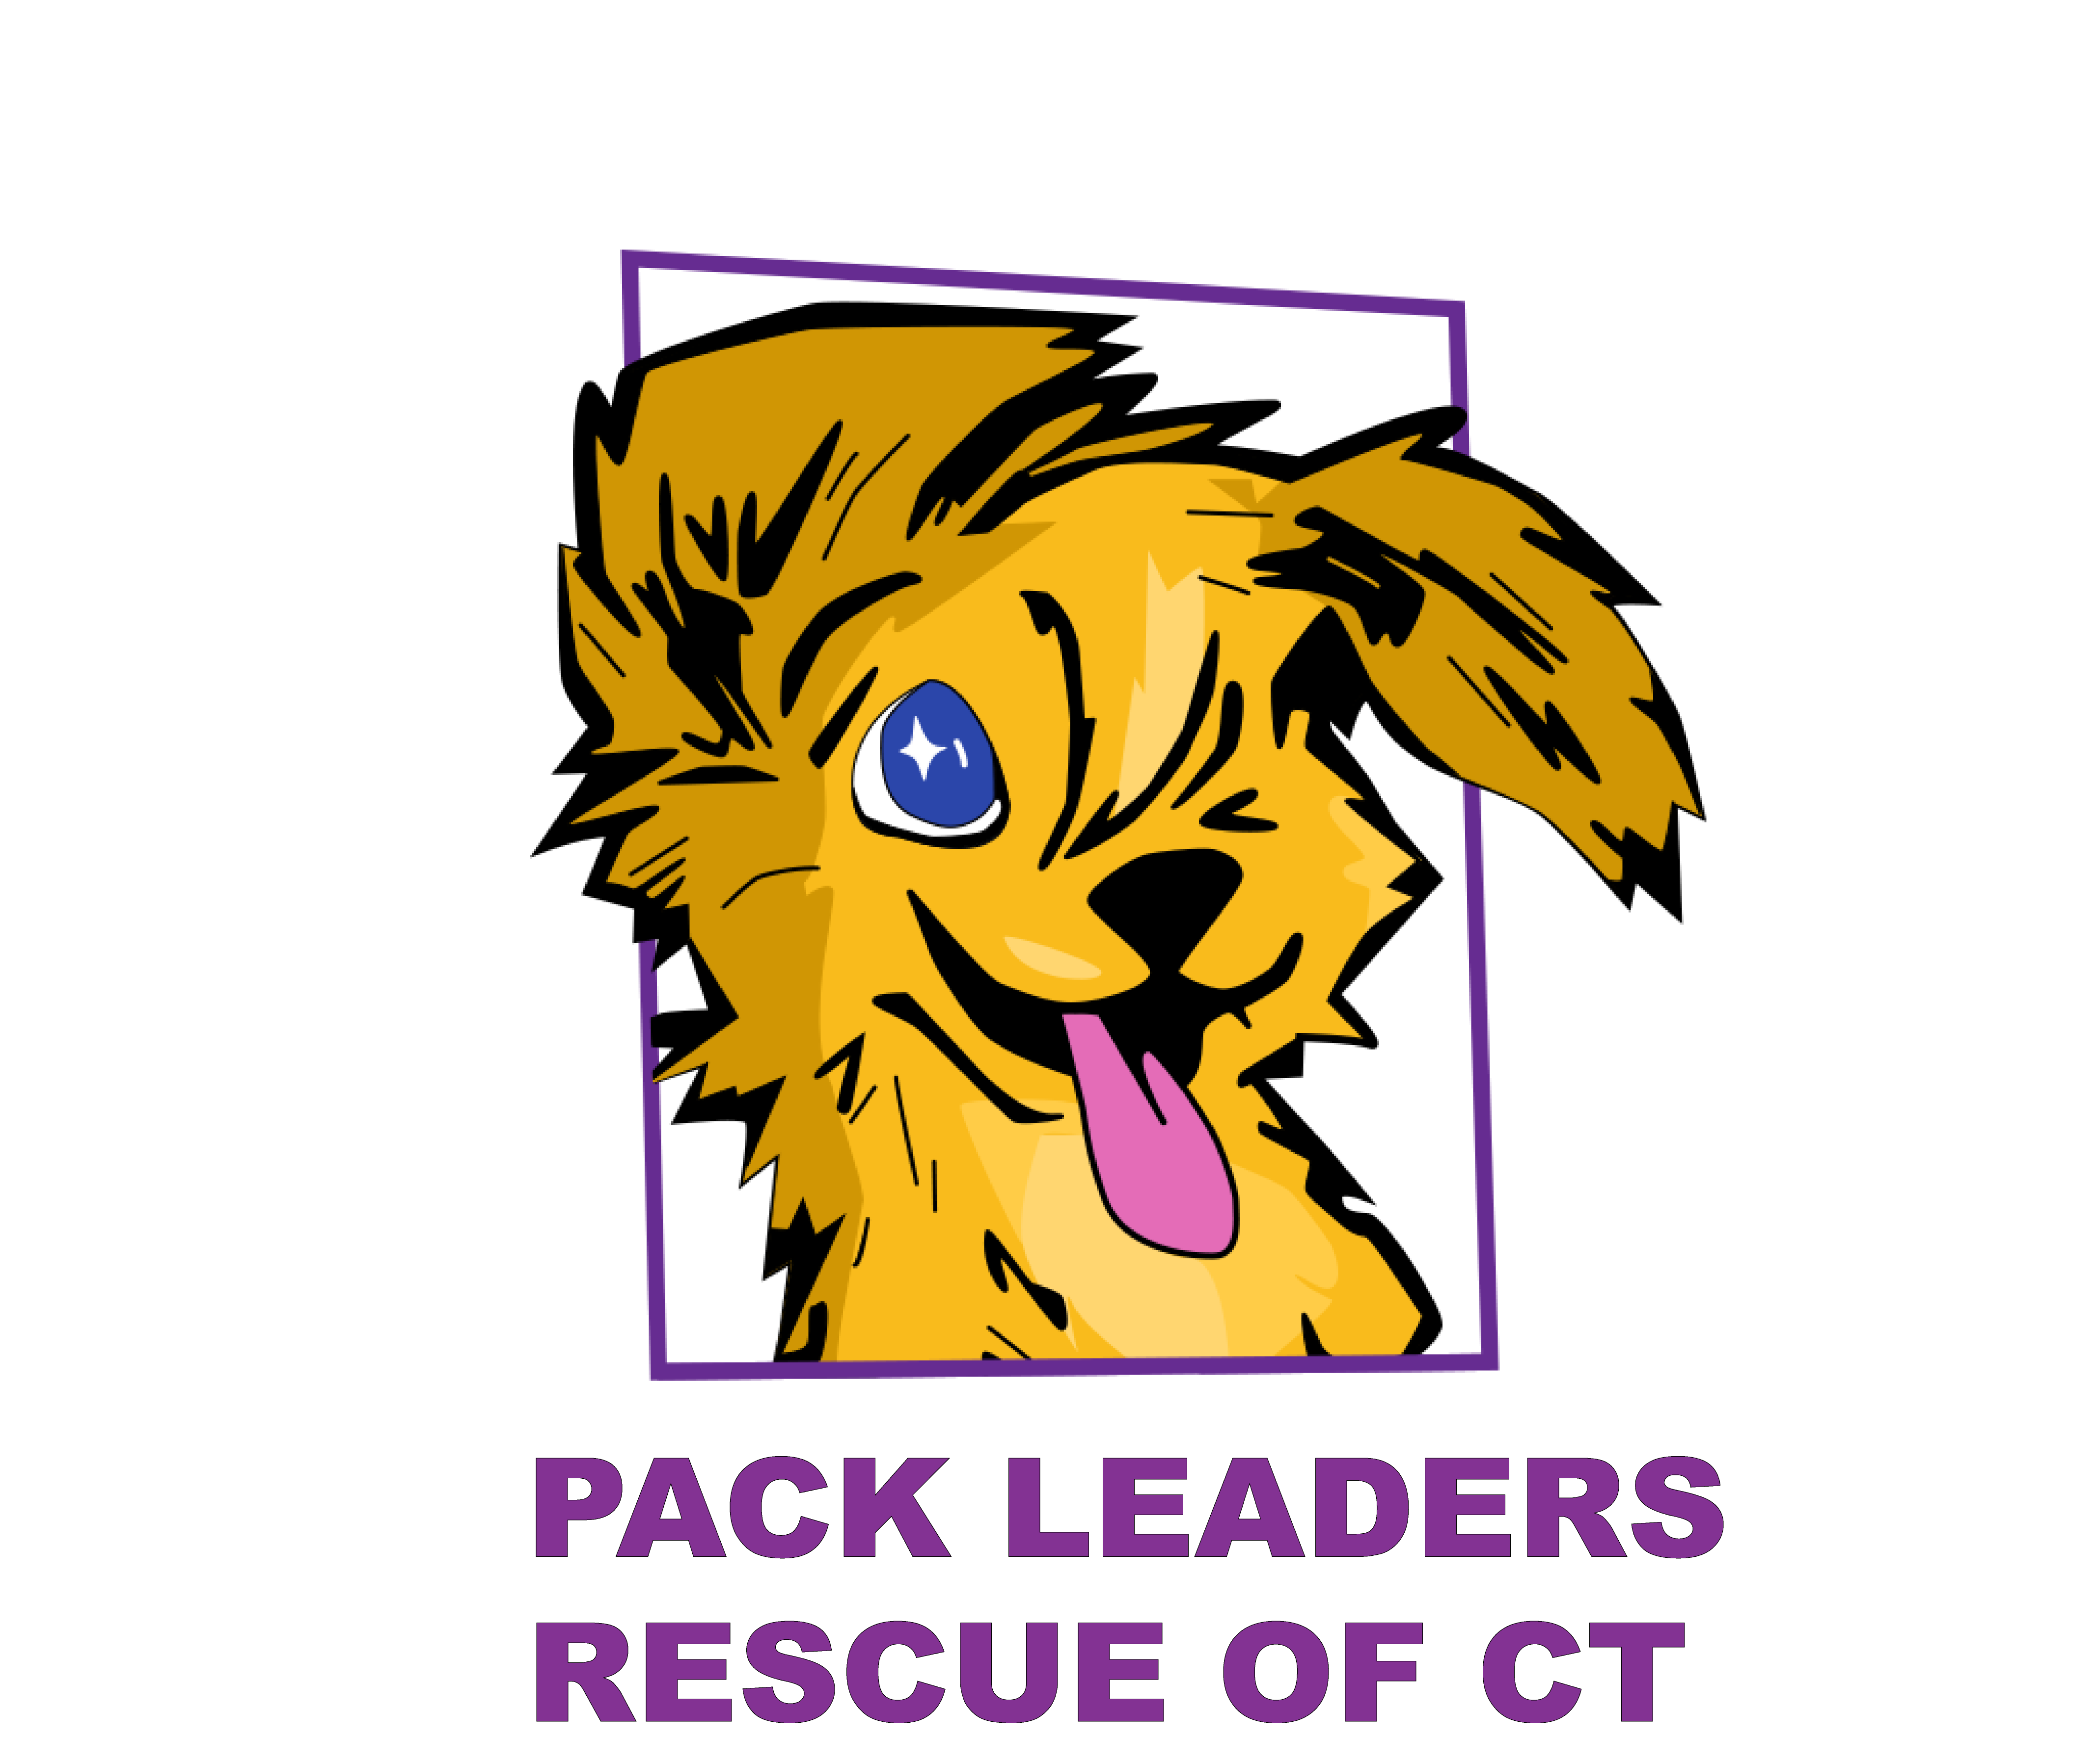 Pack Leaders Rescue of CT